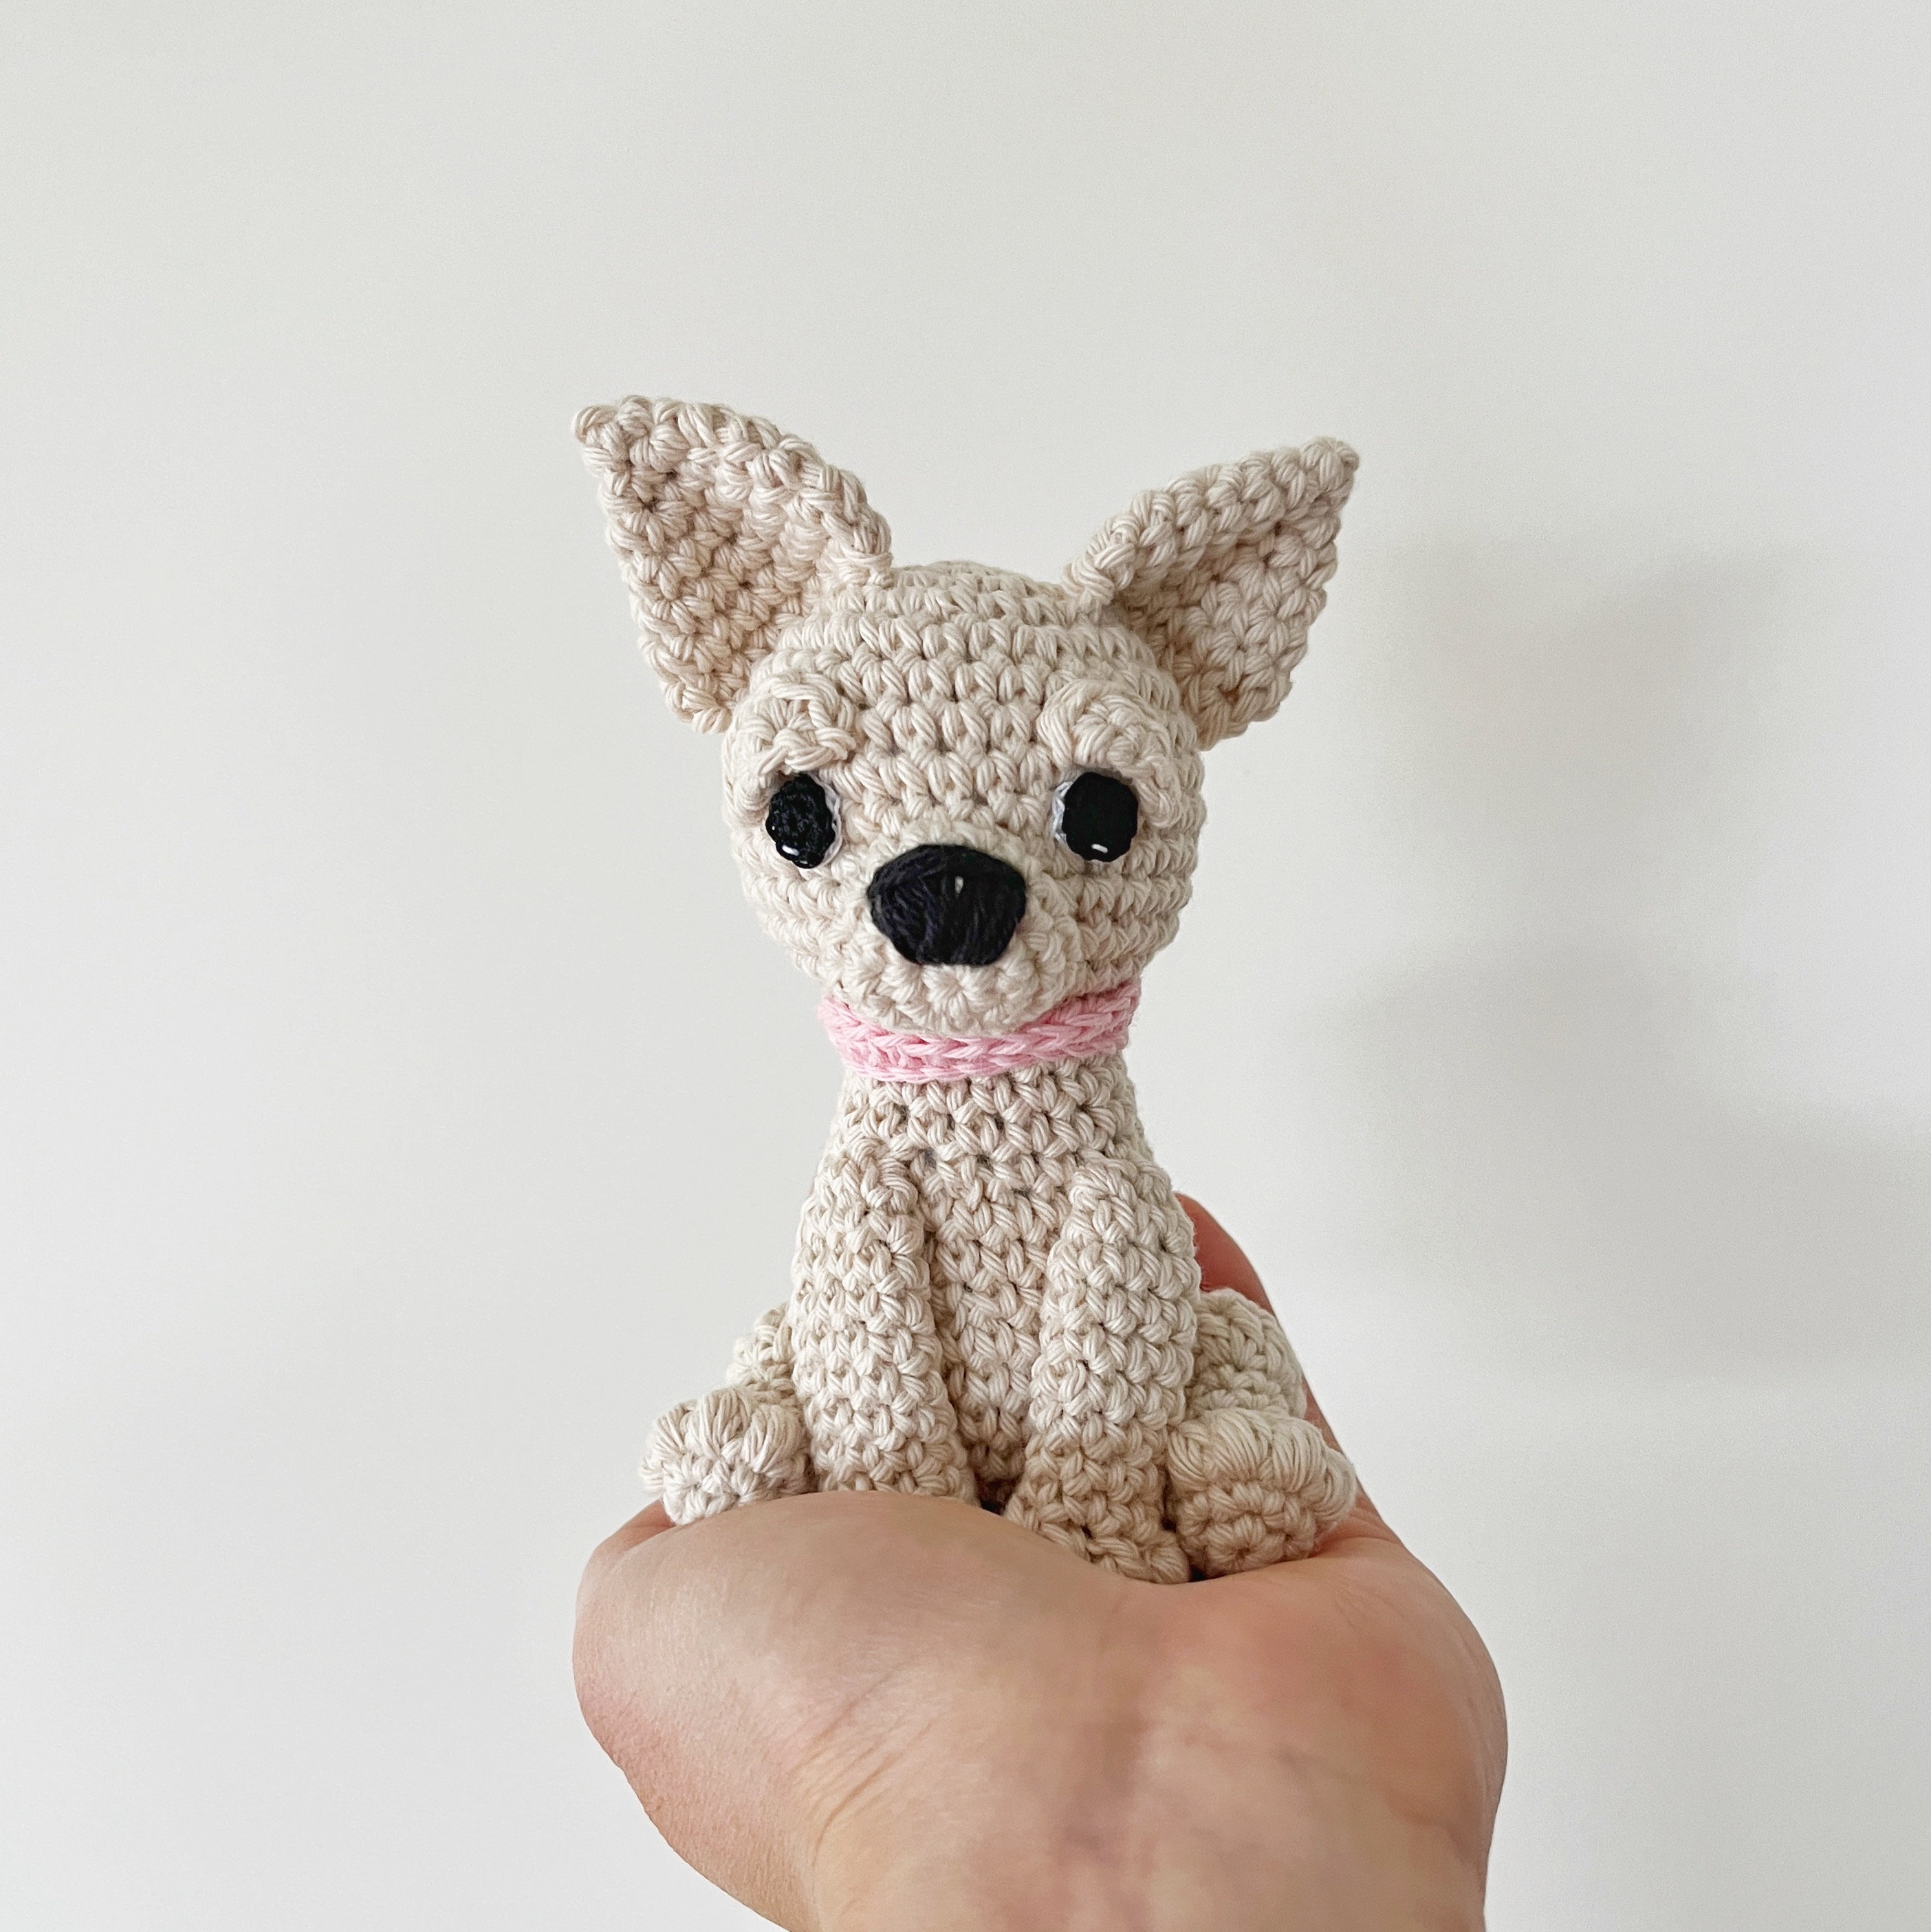 Crochet stuffed dogs, amigurumi Chihuahua in a bag, personalized gifts for  dog lovers